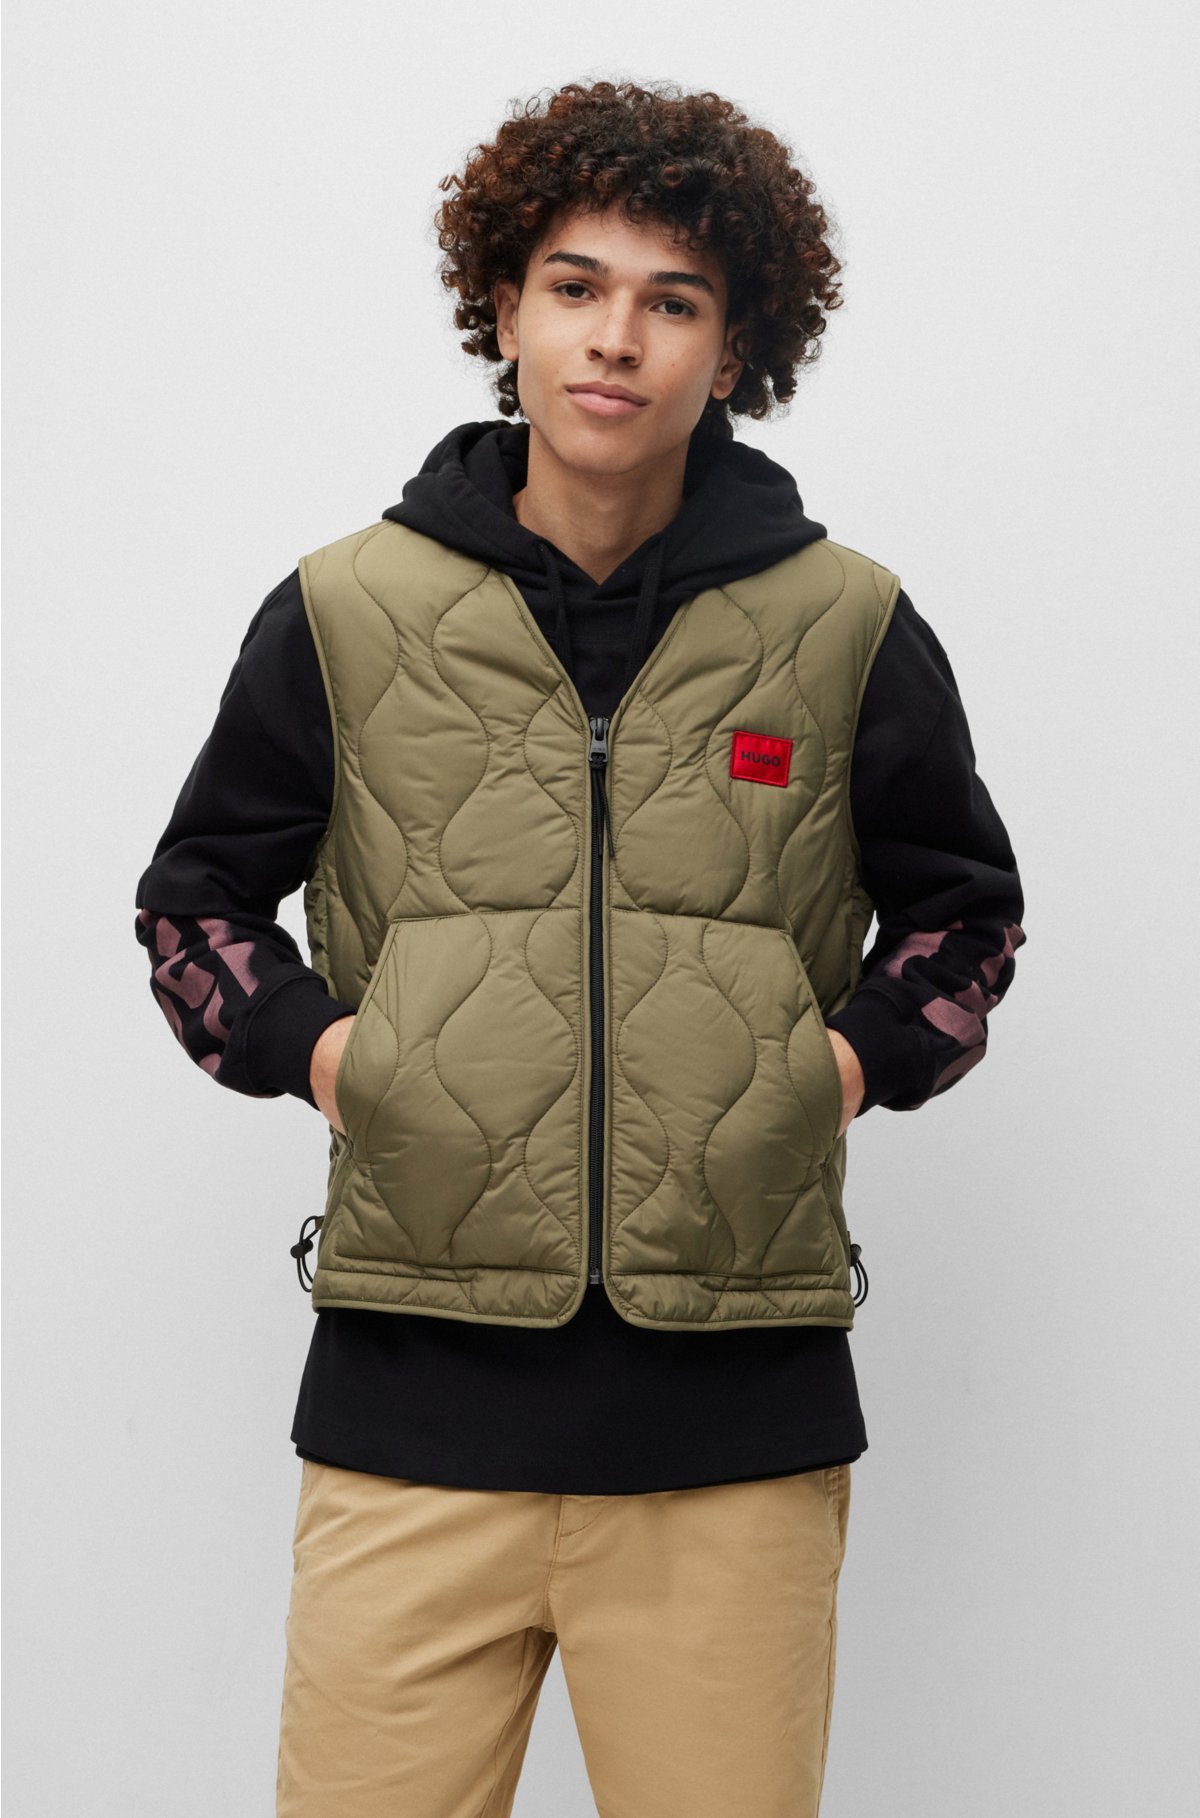 HUGO gilet red with label - logo Water-repellent